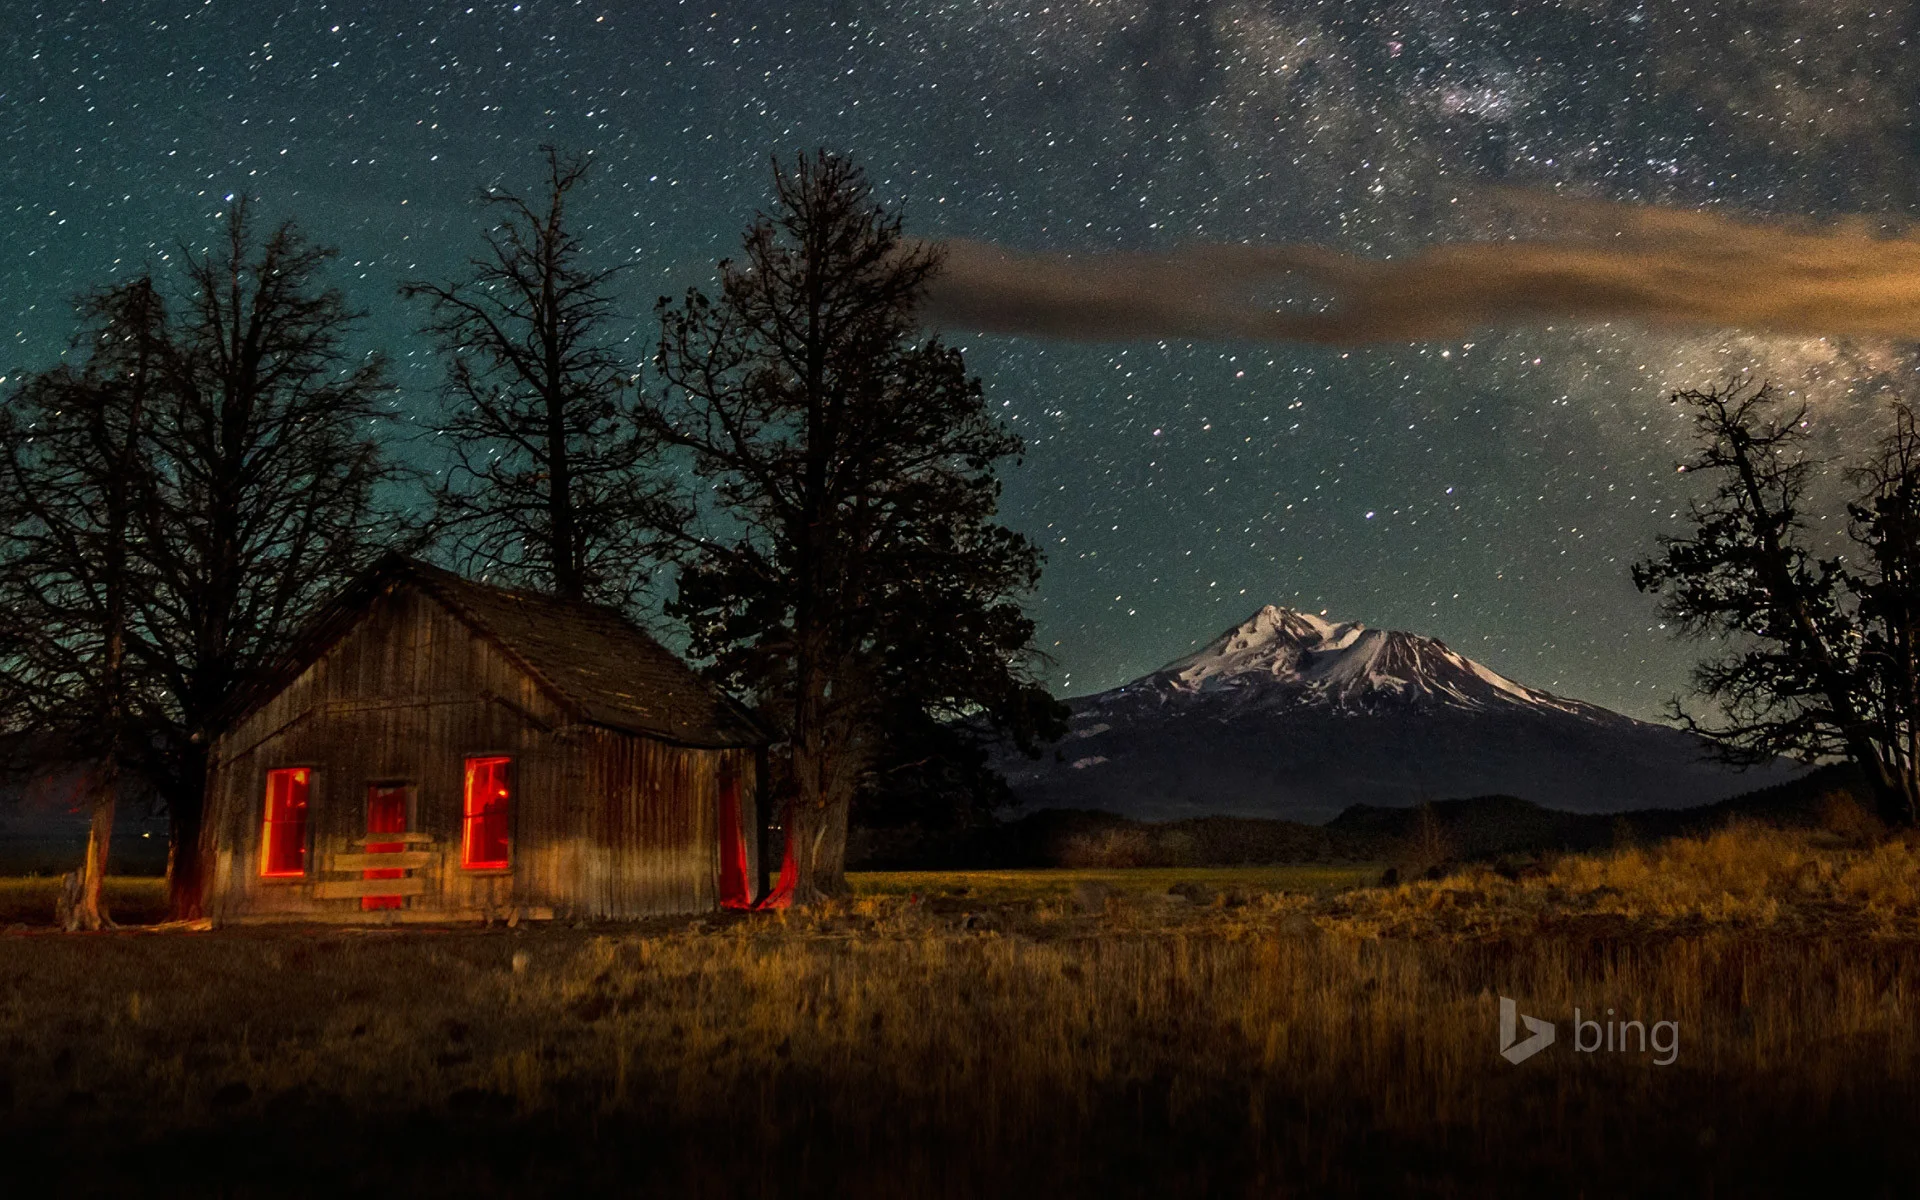 Download Bing's best images of 2013 – Wallpaper and Screensaver pack